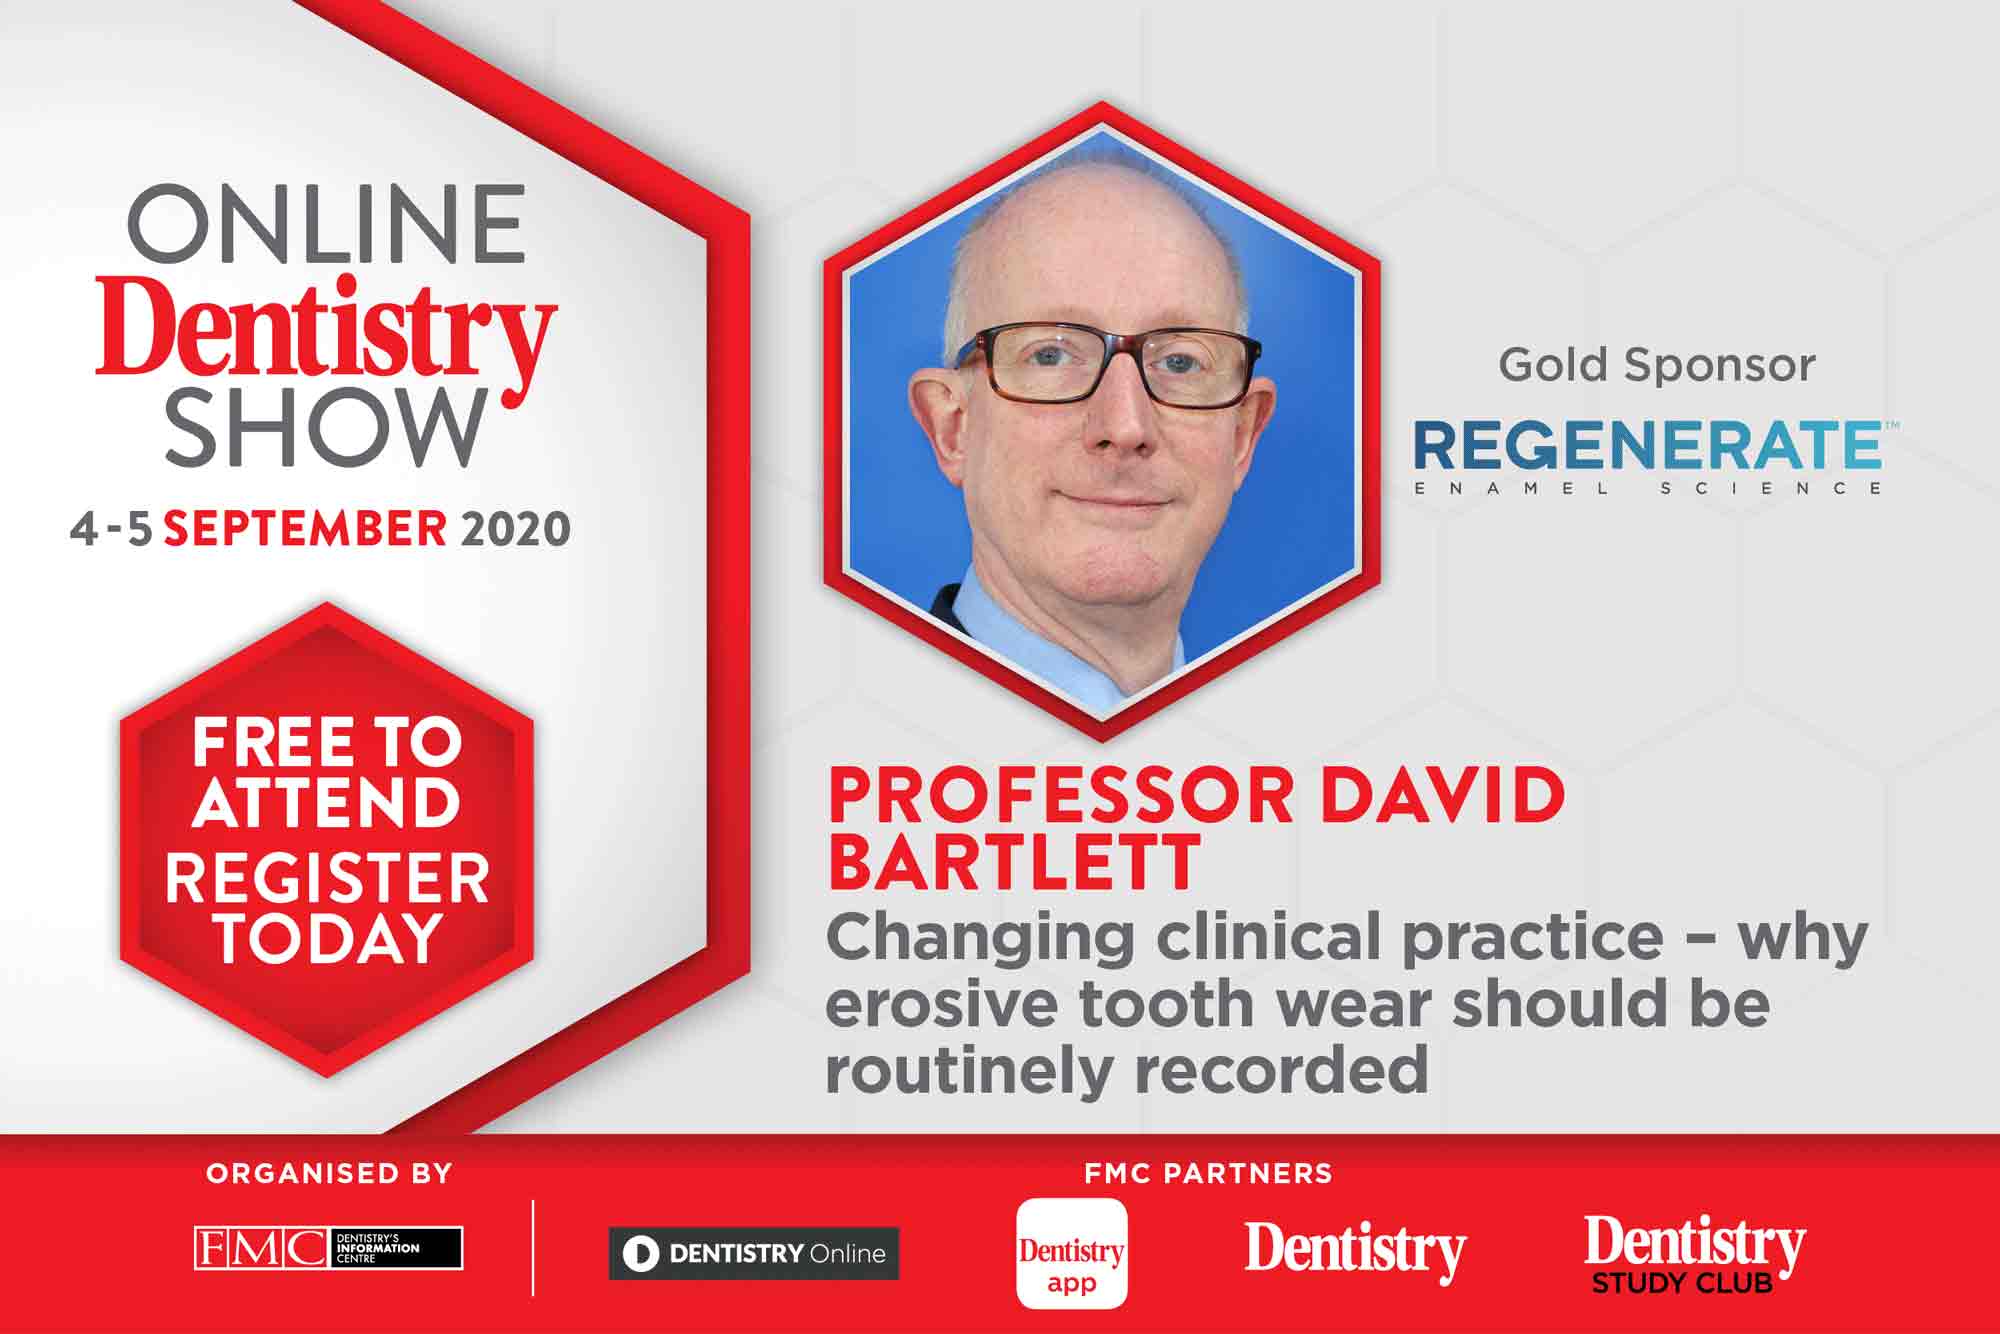 The Online Dentistry Show is hosting the first virtual exhibition in UK dentistry with support from gold sponsors, Regenerate, and speaker David Bartlett